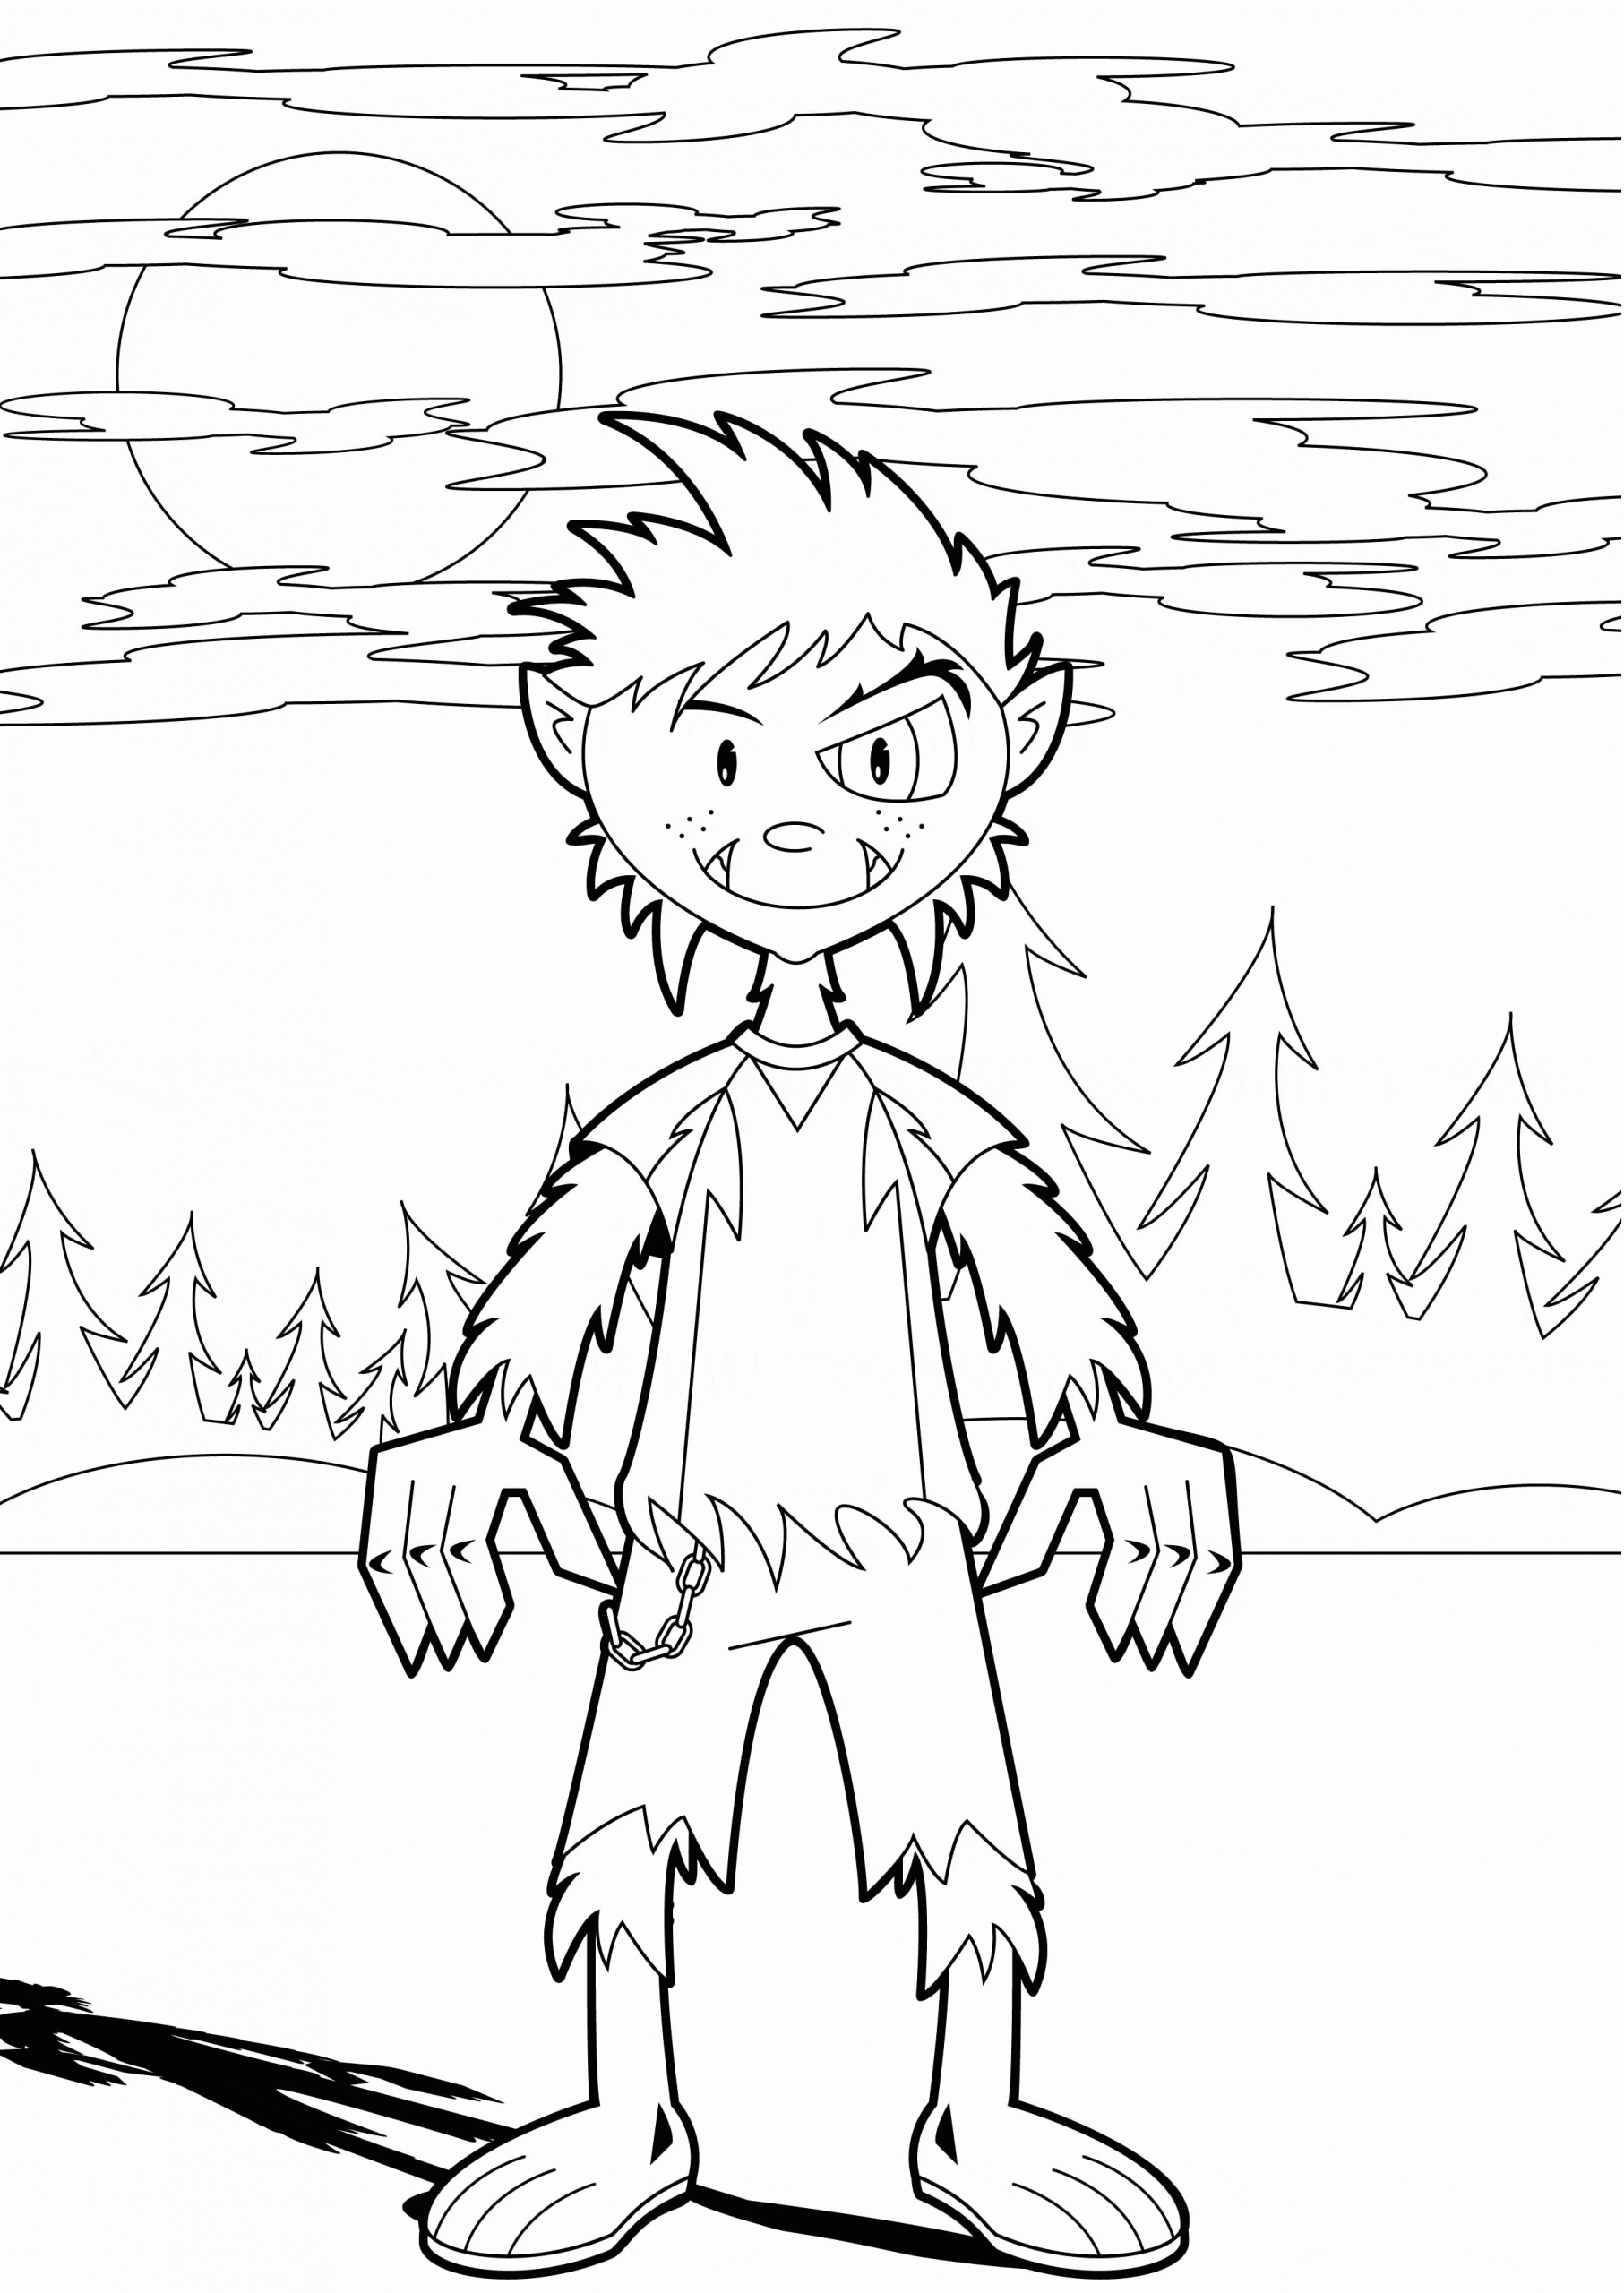 Halloween Coloring Pages Werewolf For Kids Coloring Page